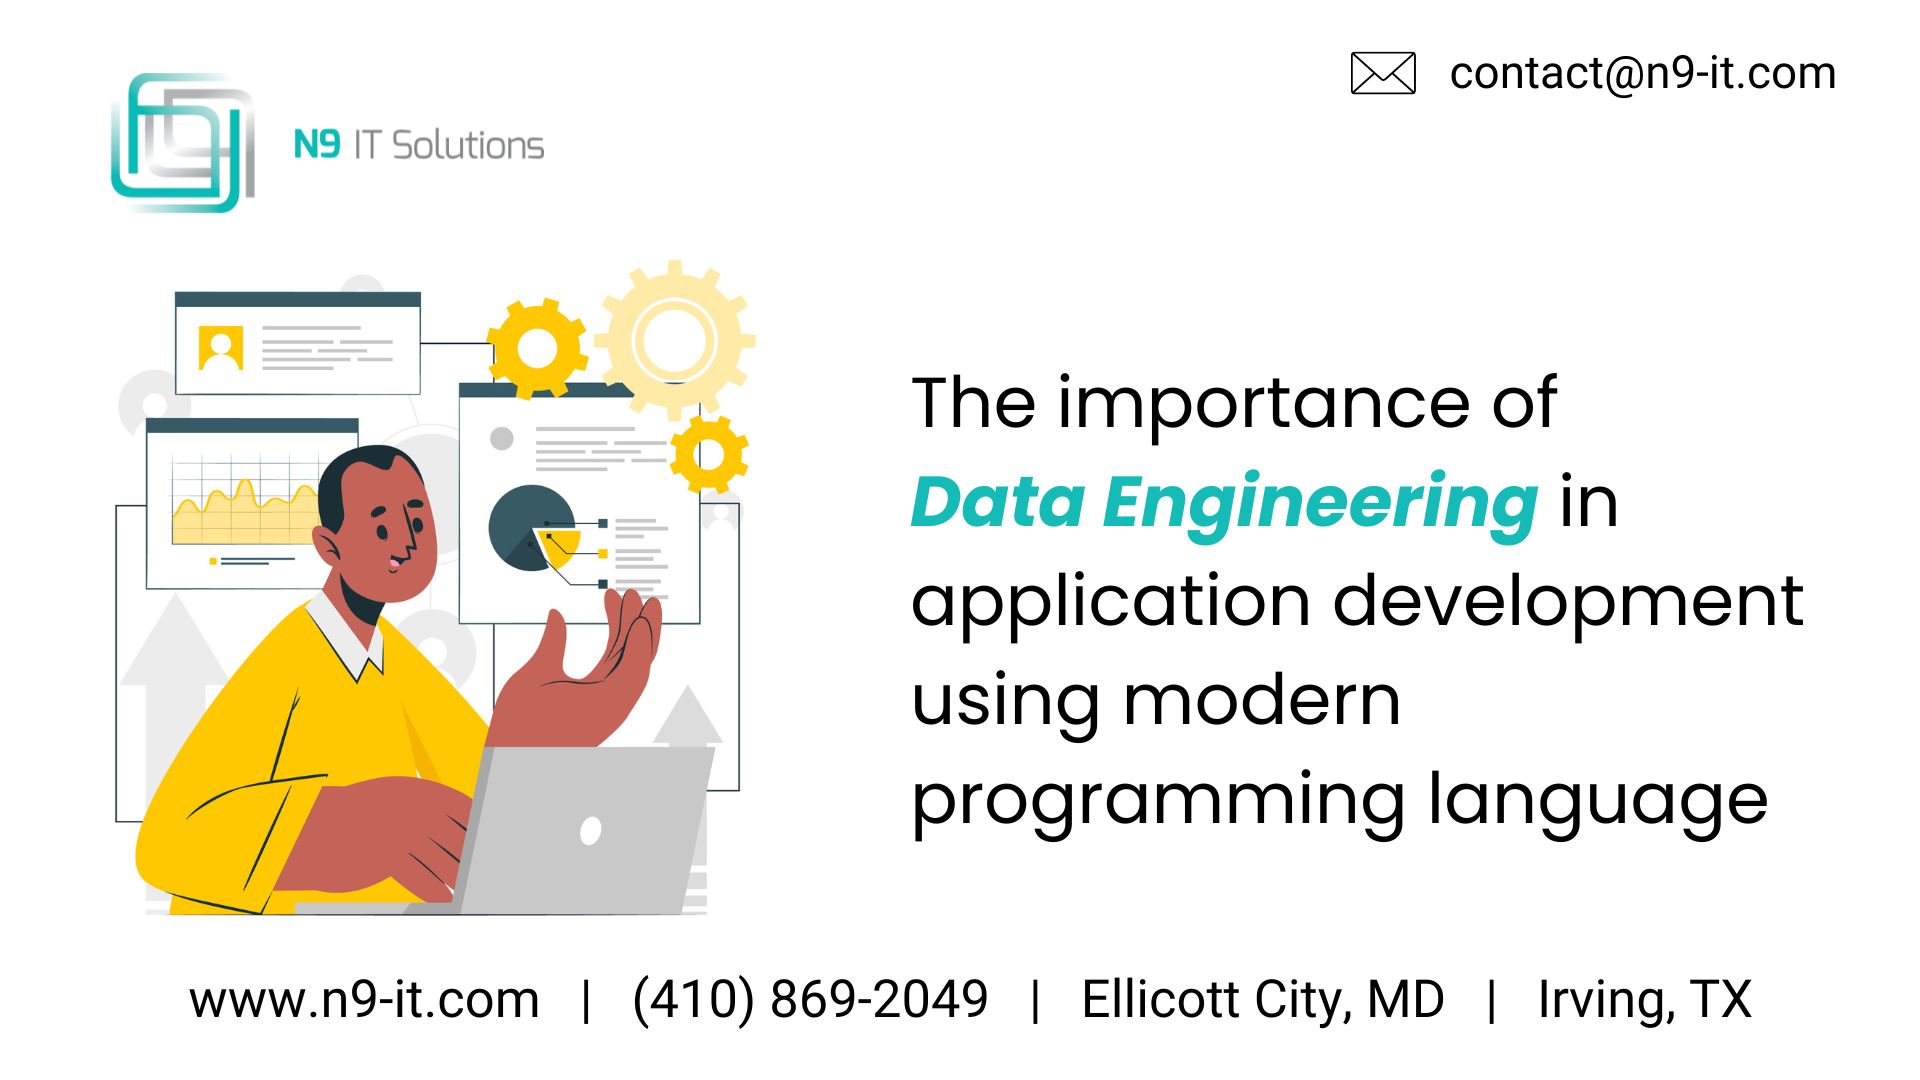 The importance of Data Engineering in the application development using modern programming language